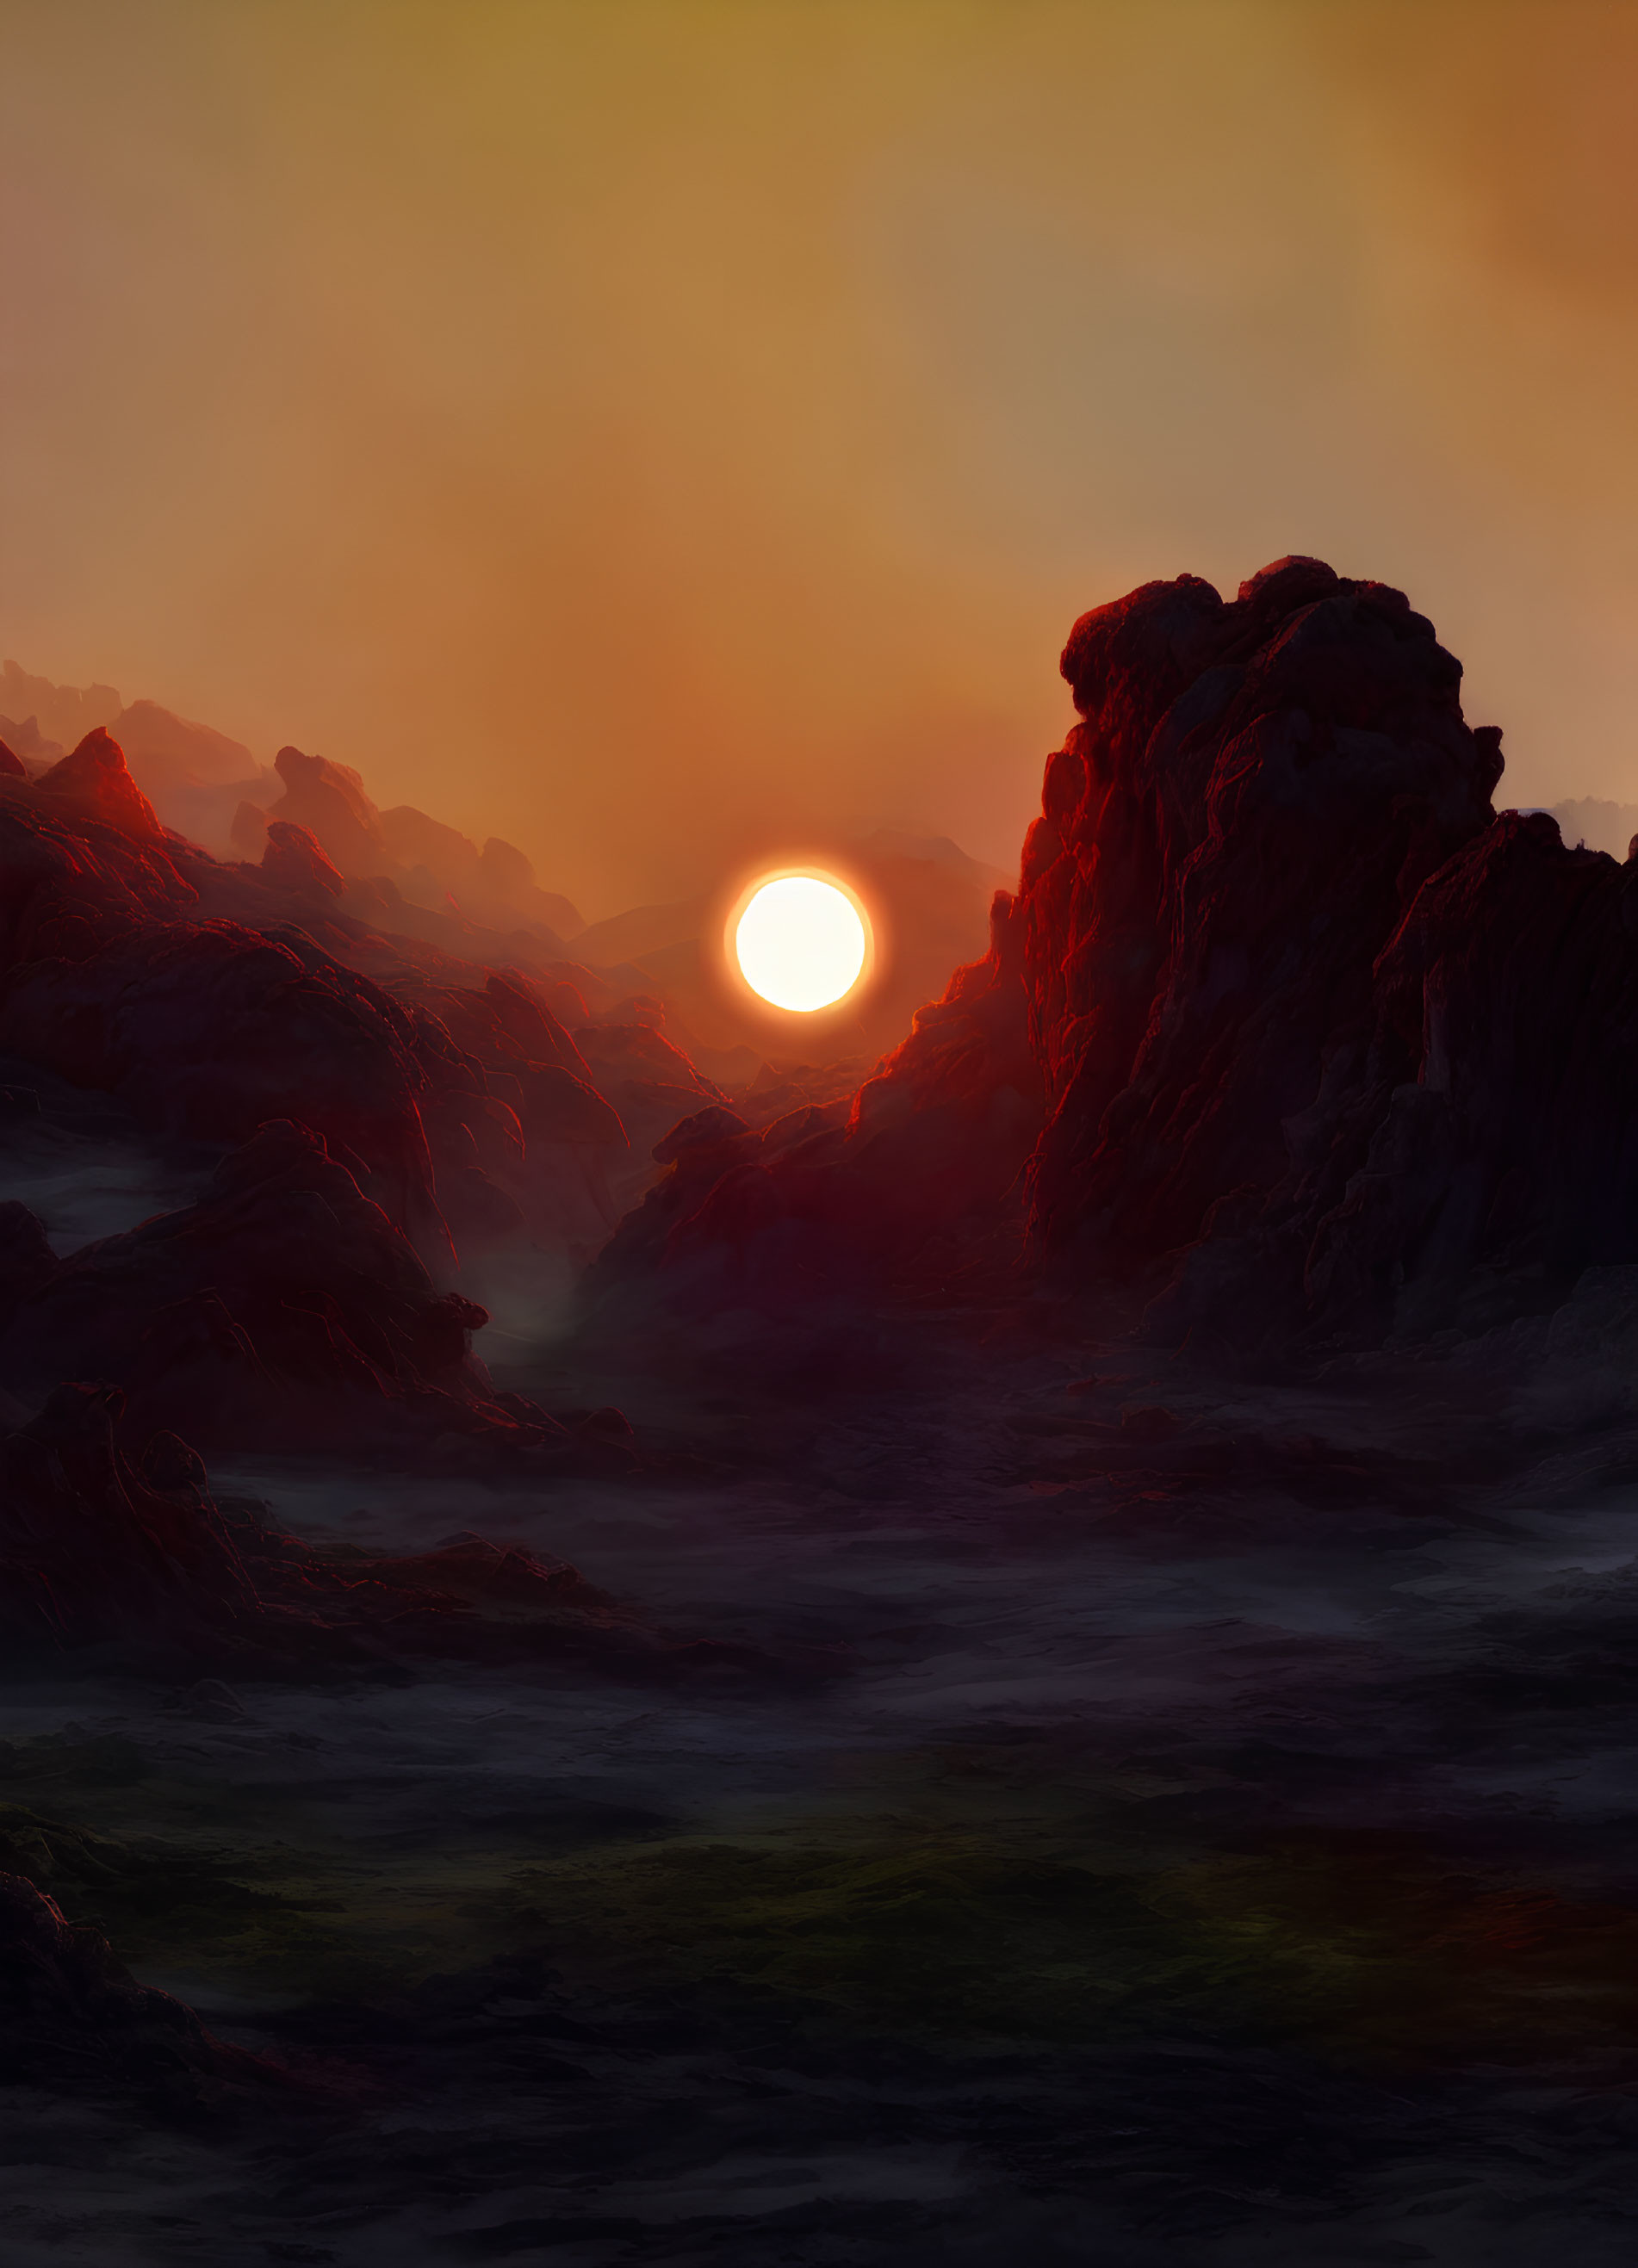 Rocky landscape with glowing sun setting behind craggy peaks in red-tinged sky